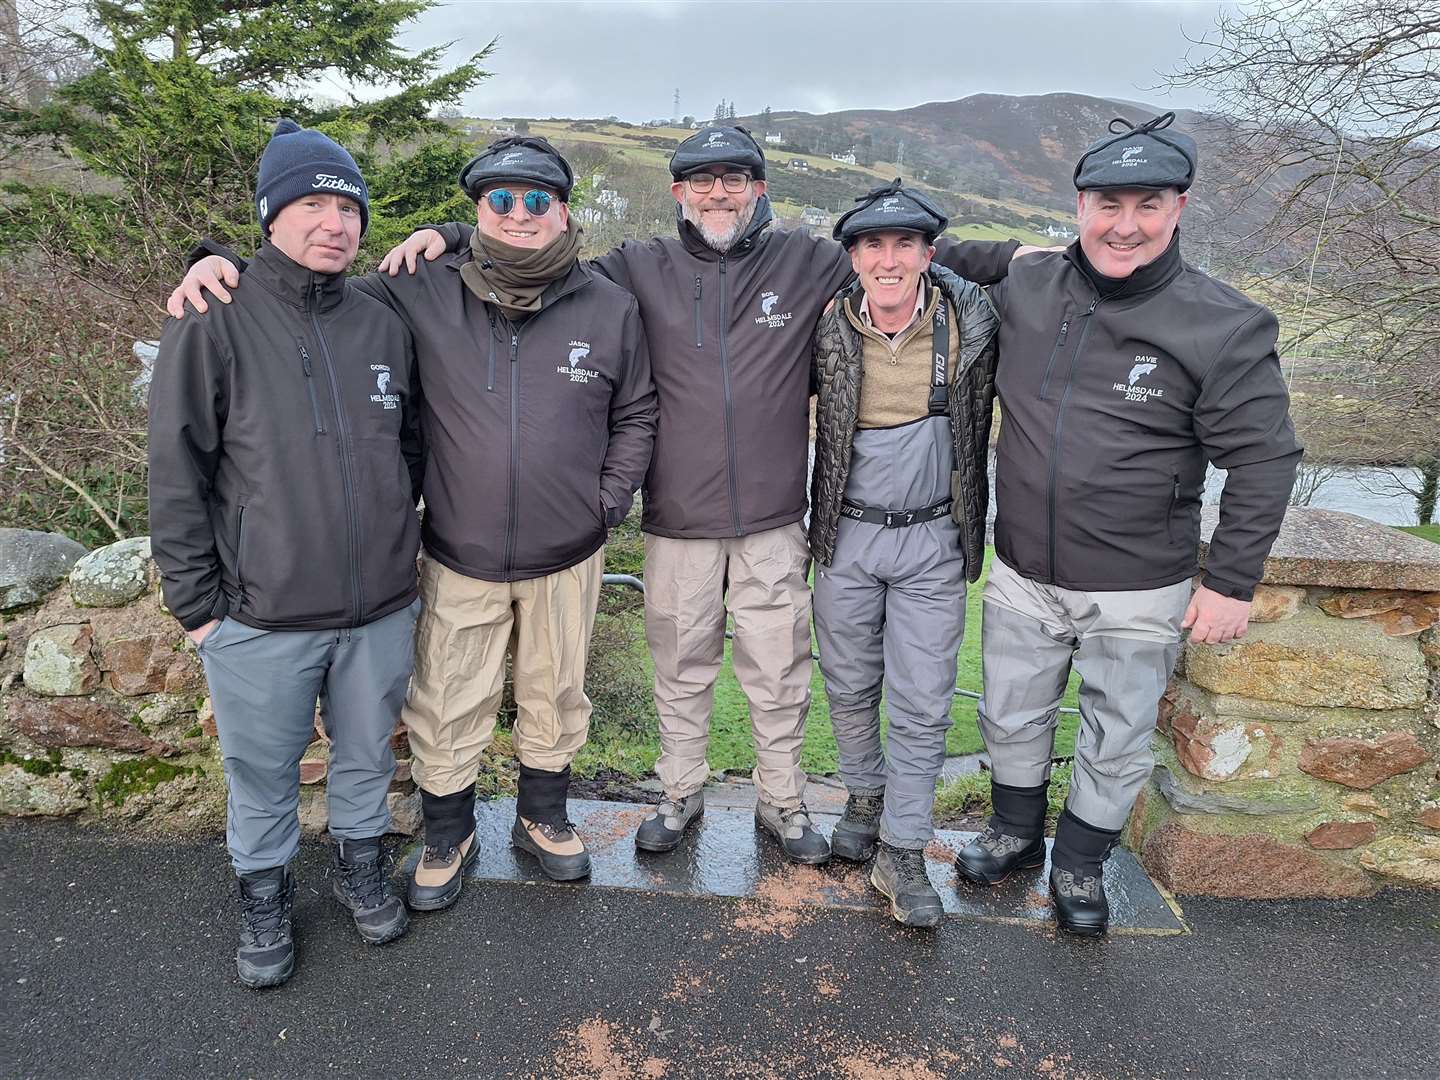 This group of friends from Glasgow are celebrating their tenth year of fishing the Helmsdale. Each year they wear personalised matching jackets and hats with their name, a salmon and 'Helmsdale' printed on them, along with the year. From left, Gordon Murray, Jason McRoberts, Bob Murray, Michael McAnenay and Davie Baird.